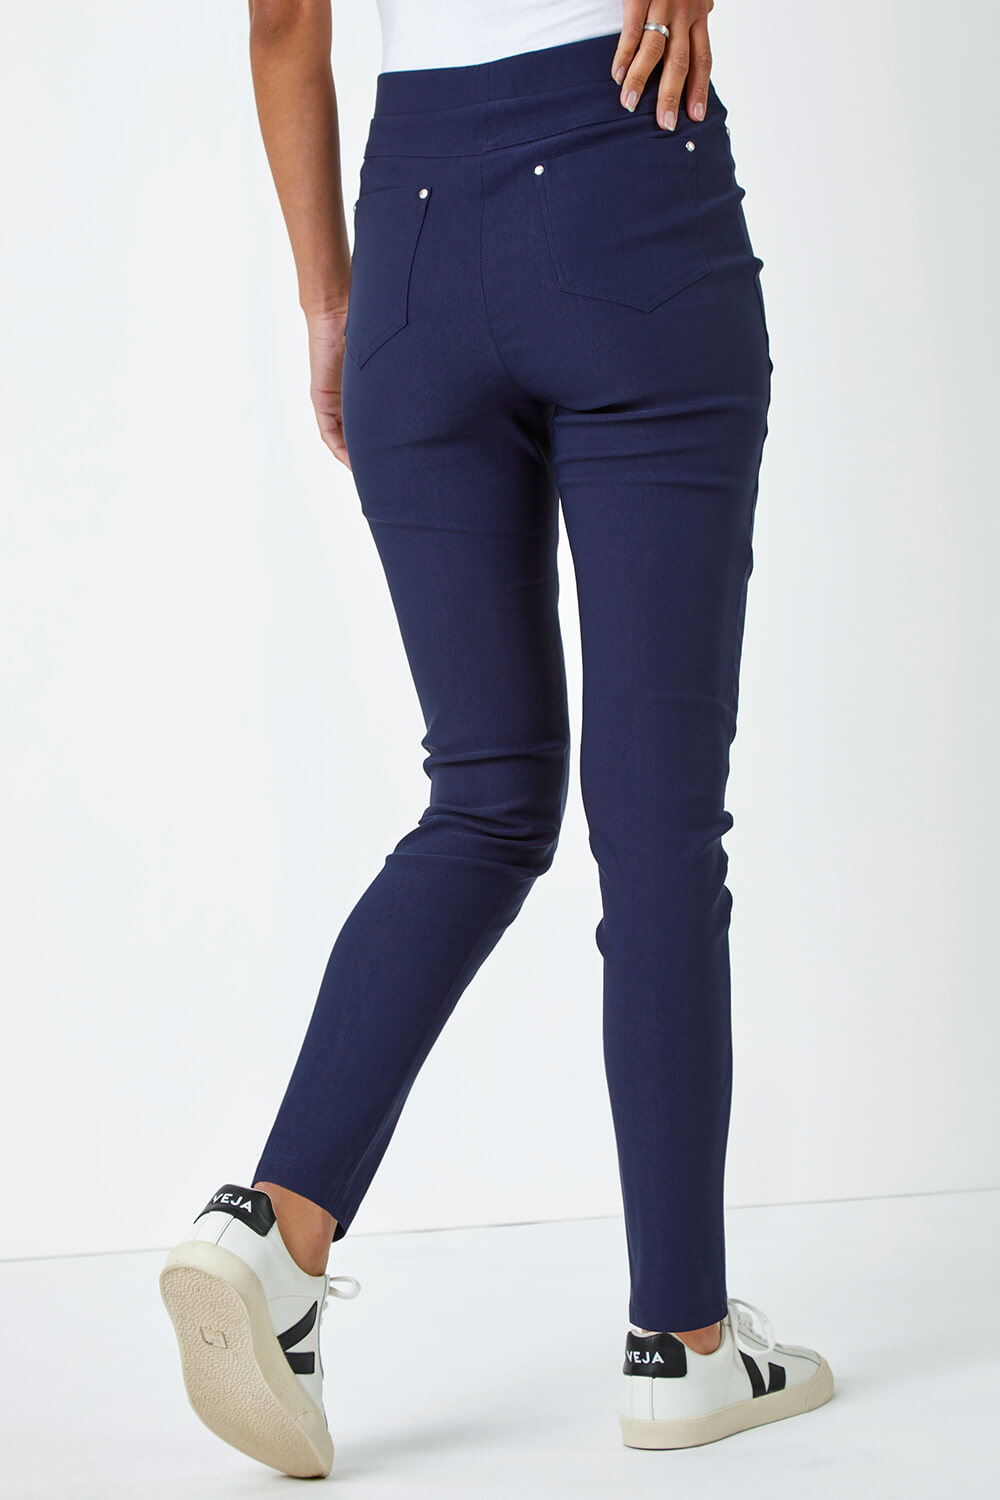 Navy  Stretch Jean Trouser, Image 3 of 4